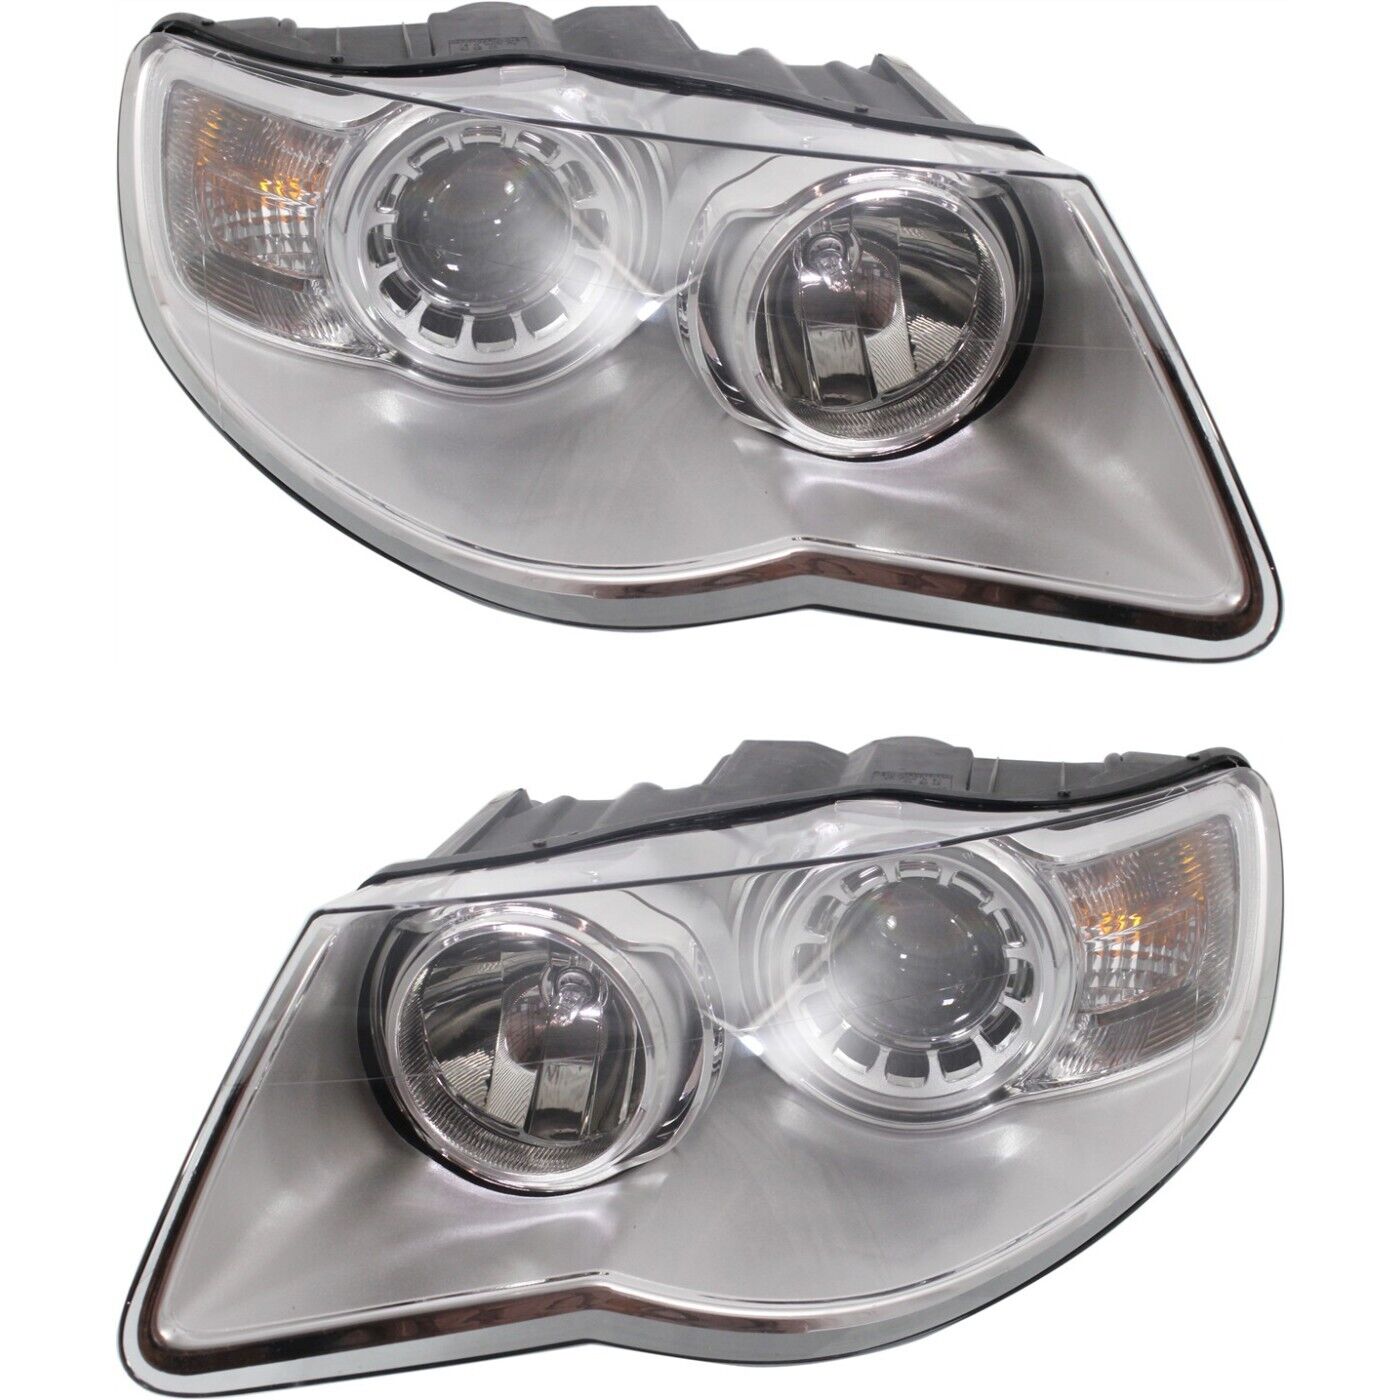 Headlight Set For 2008-2010 Volkswagen Touareg Left and Right With Bulb Halogen